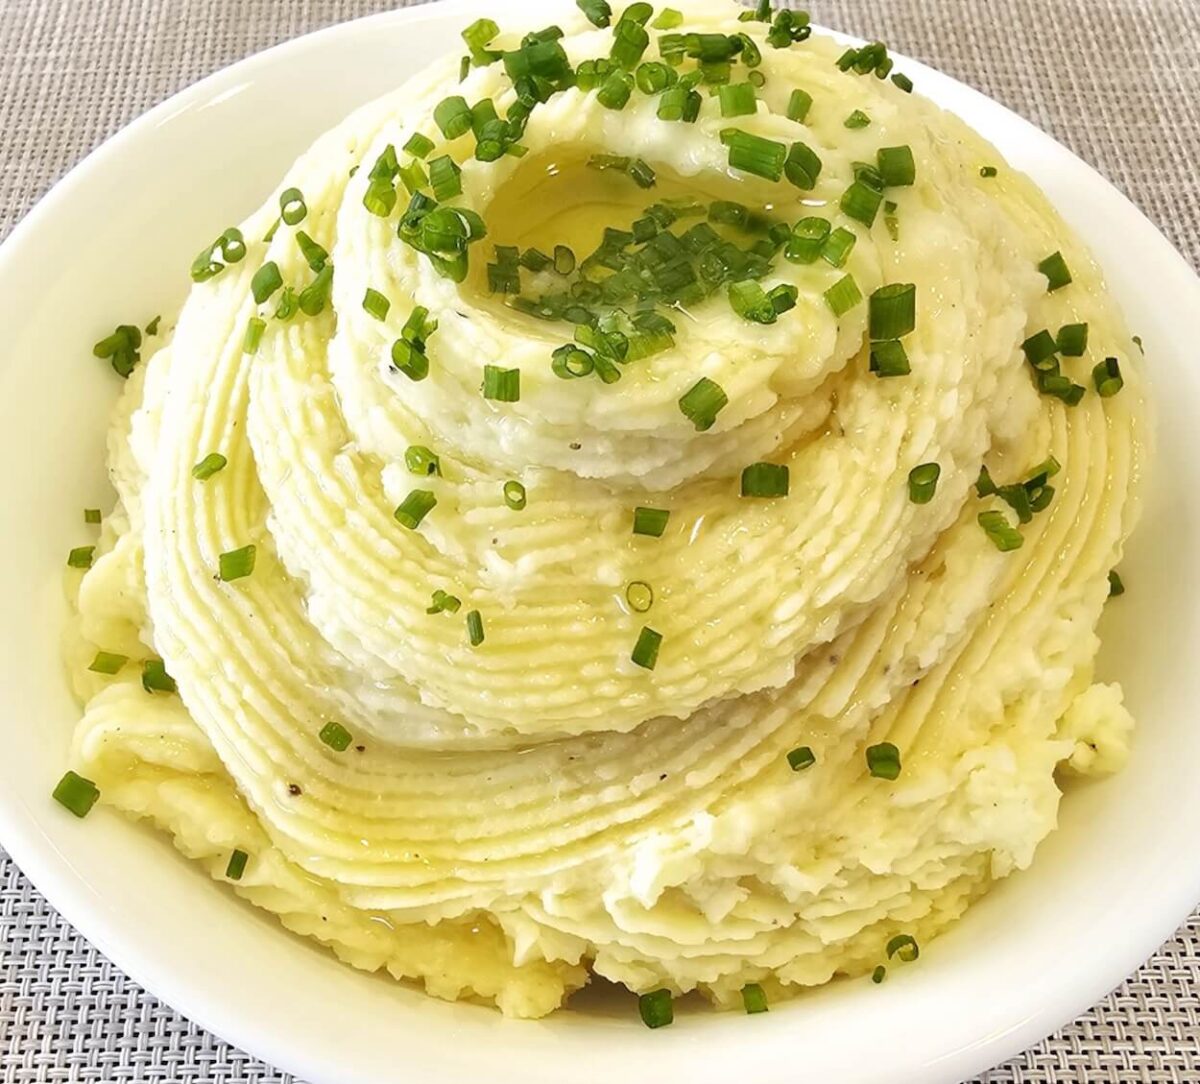 pile of mashed potatoes with herbs in a white bowl.